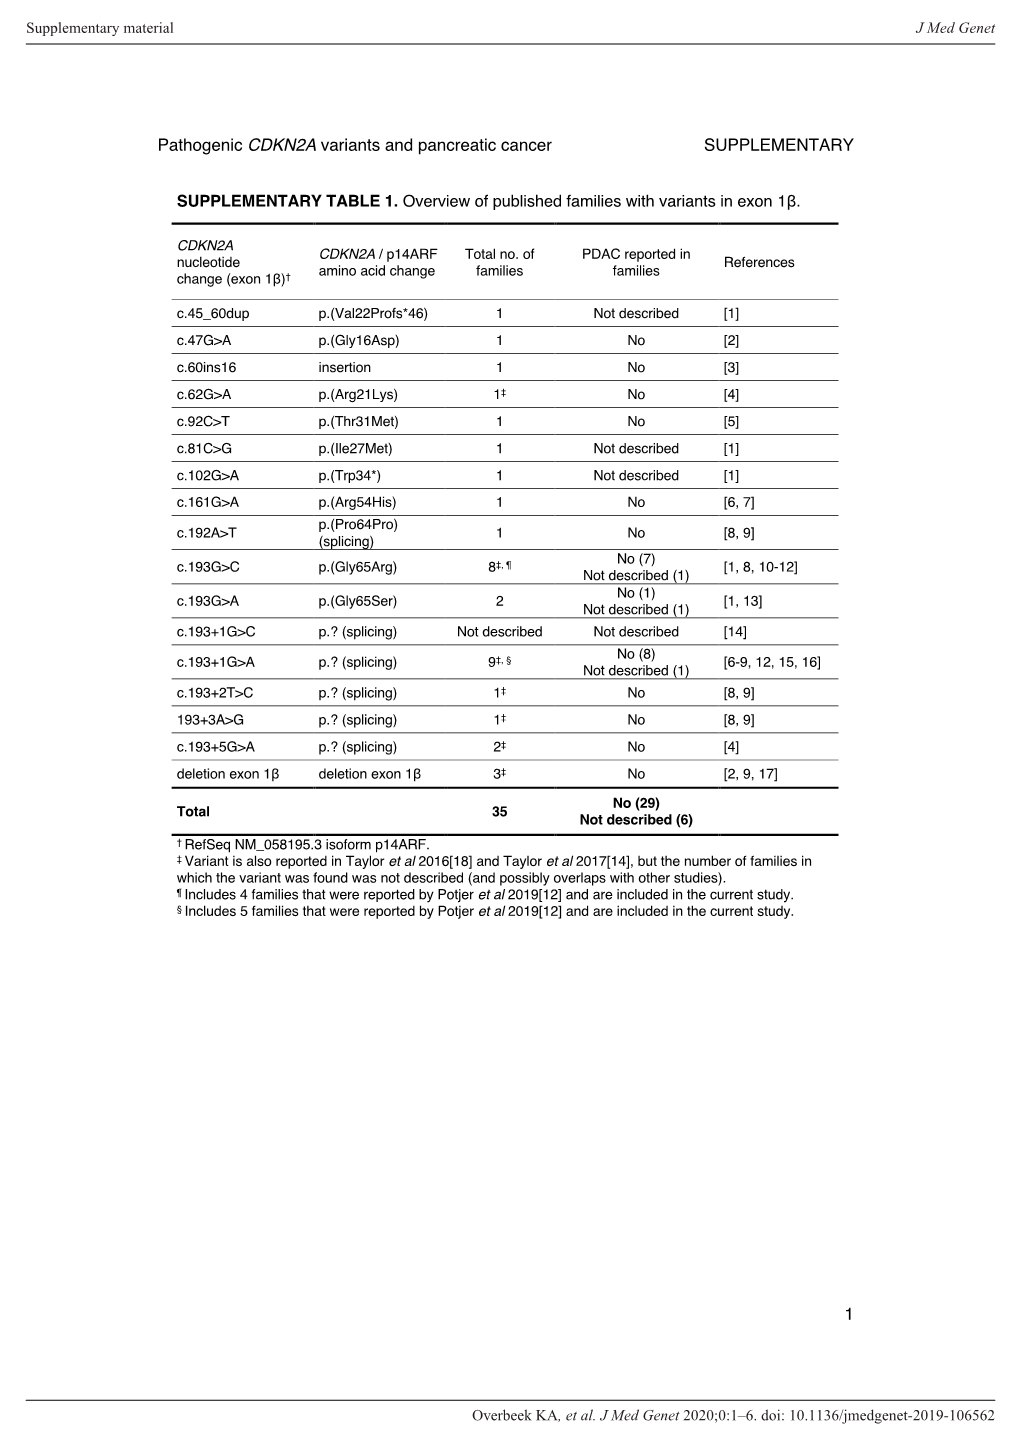 Pathogenic CDKN2A Variants and Pancreatic Cancer SUPPLEMENTARY